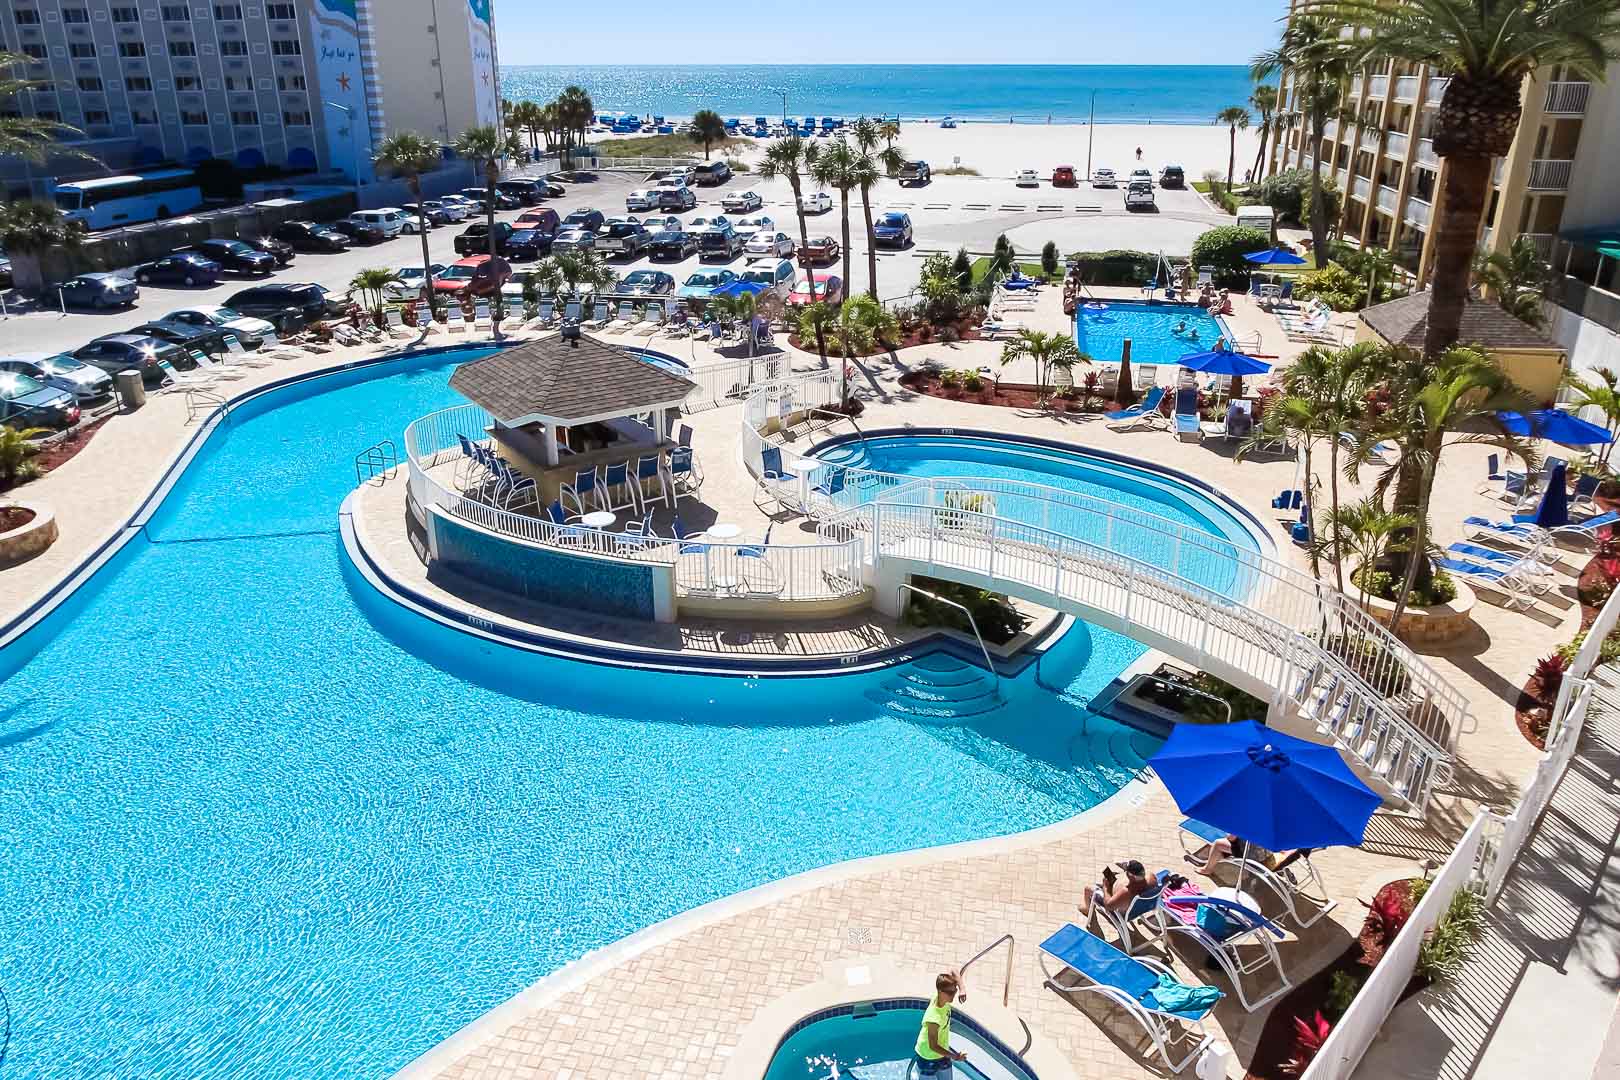 A peaceful outdoor swimming pool and the nearby beach at VRI's Coral Reef Beach Resort in St. Pete Beach, Florida.